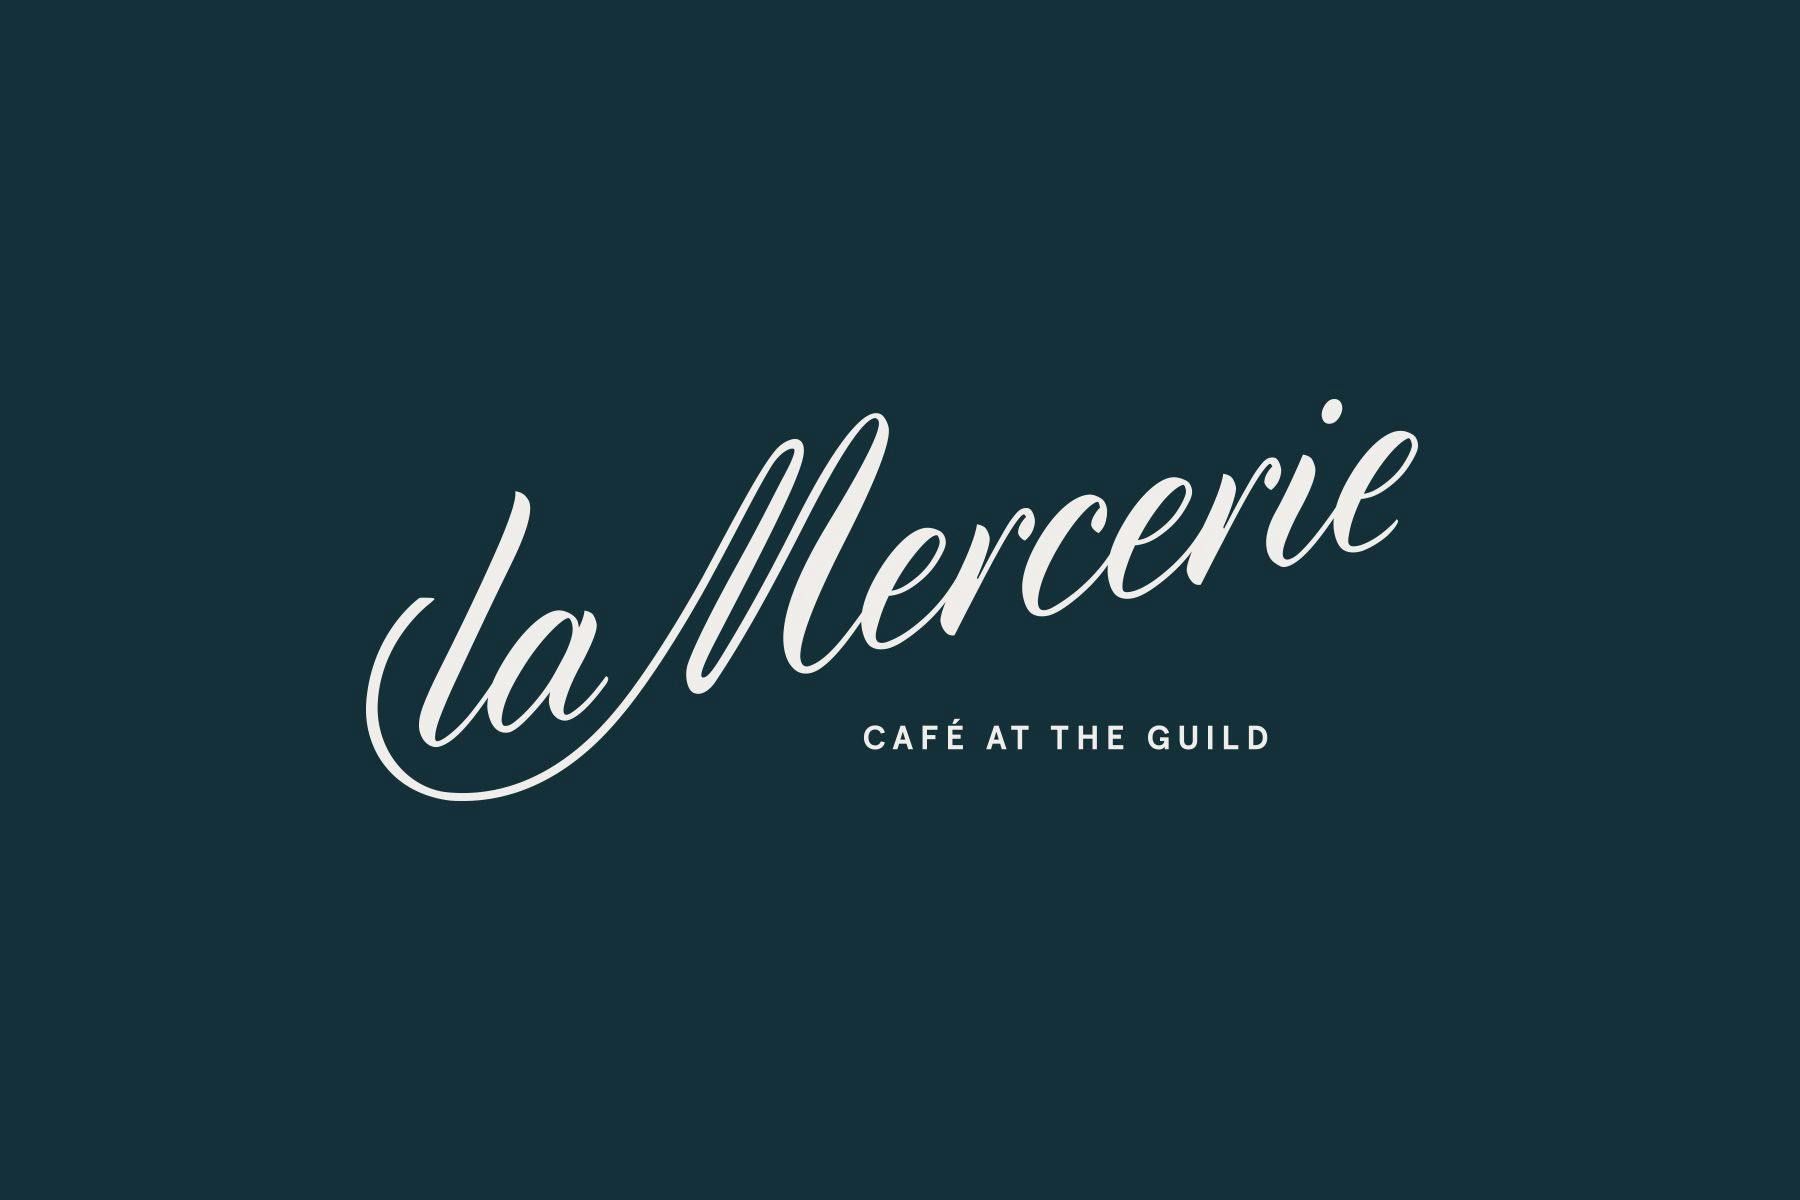 Image from La Mercerie / The Guild